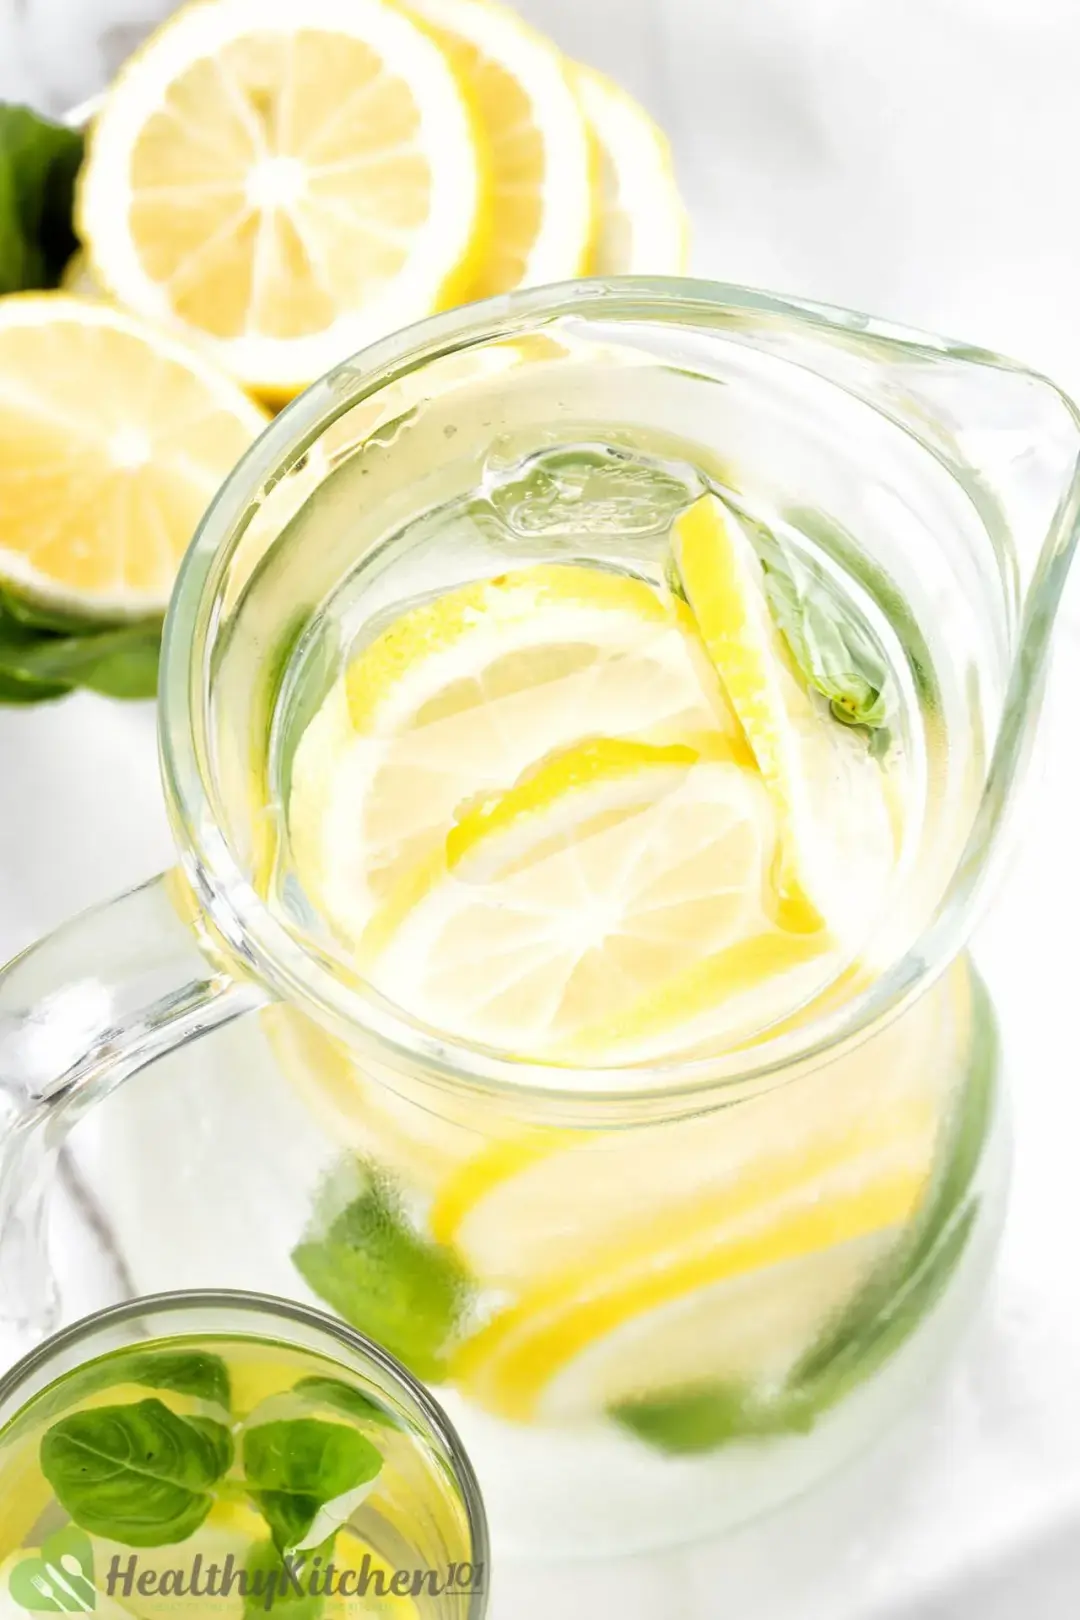 A close-up shot of a lemon water pitcher, next to a bowl of lemon wheels on basil leaves